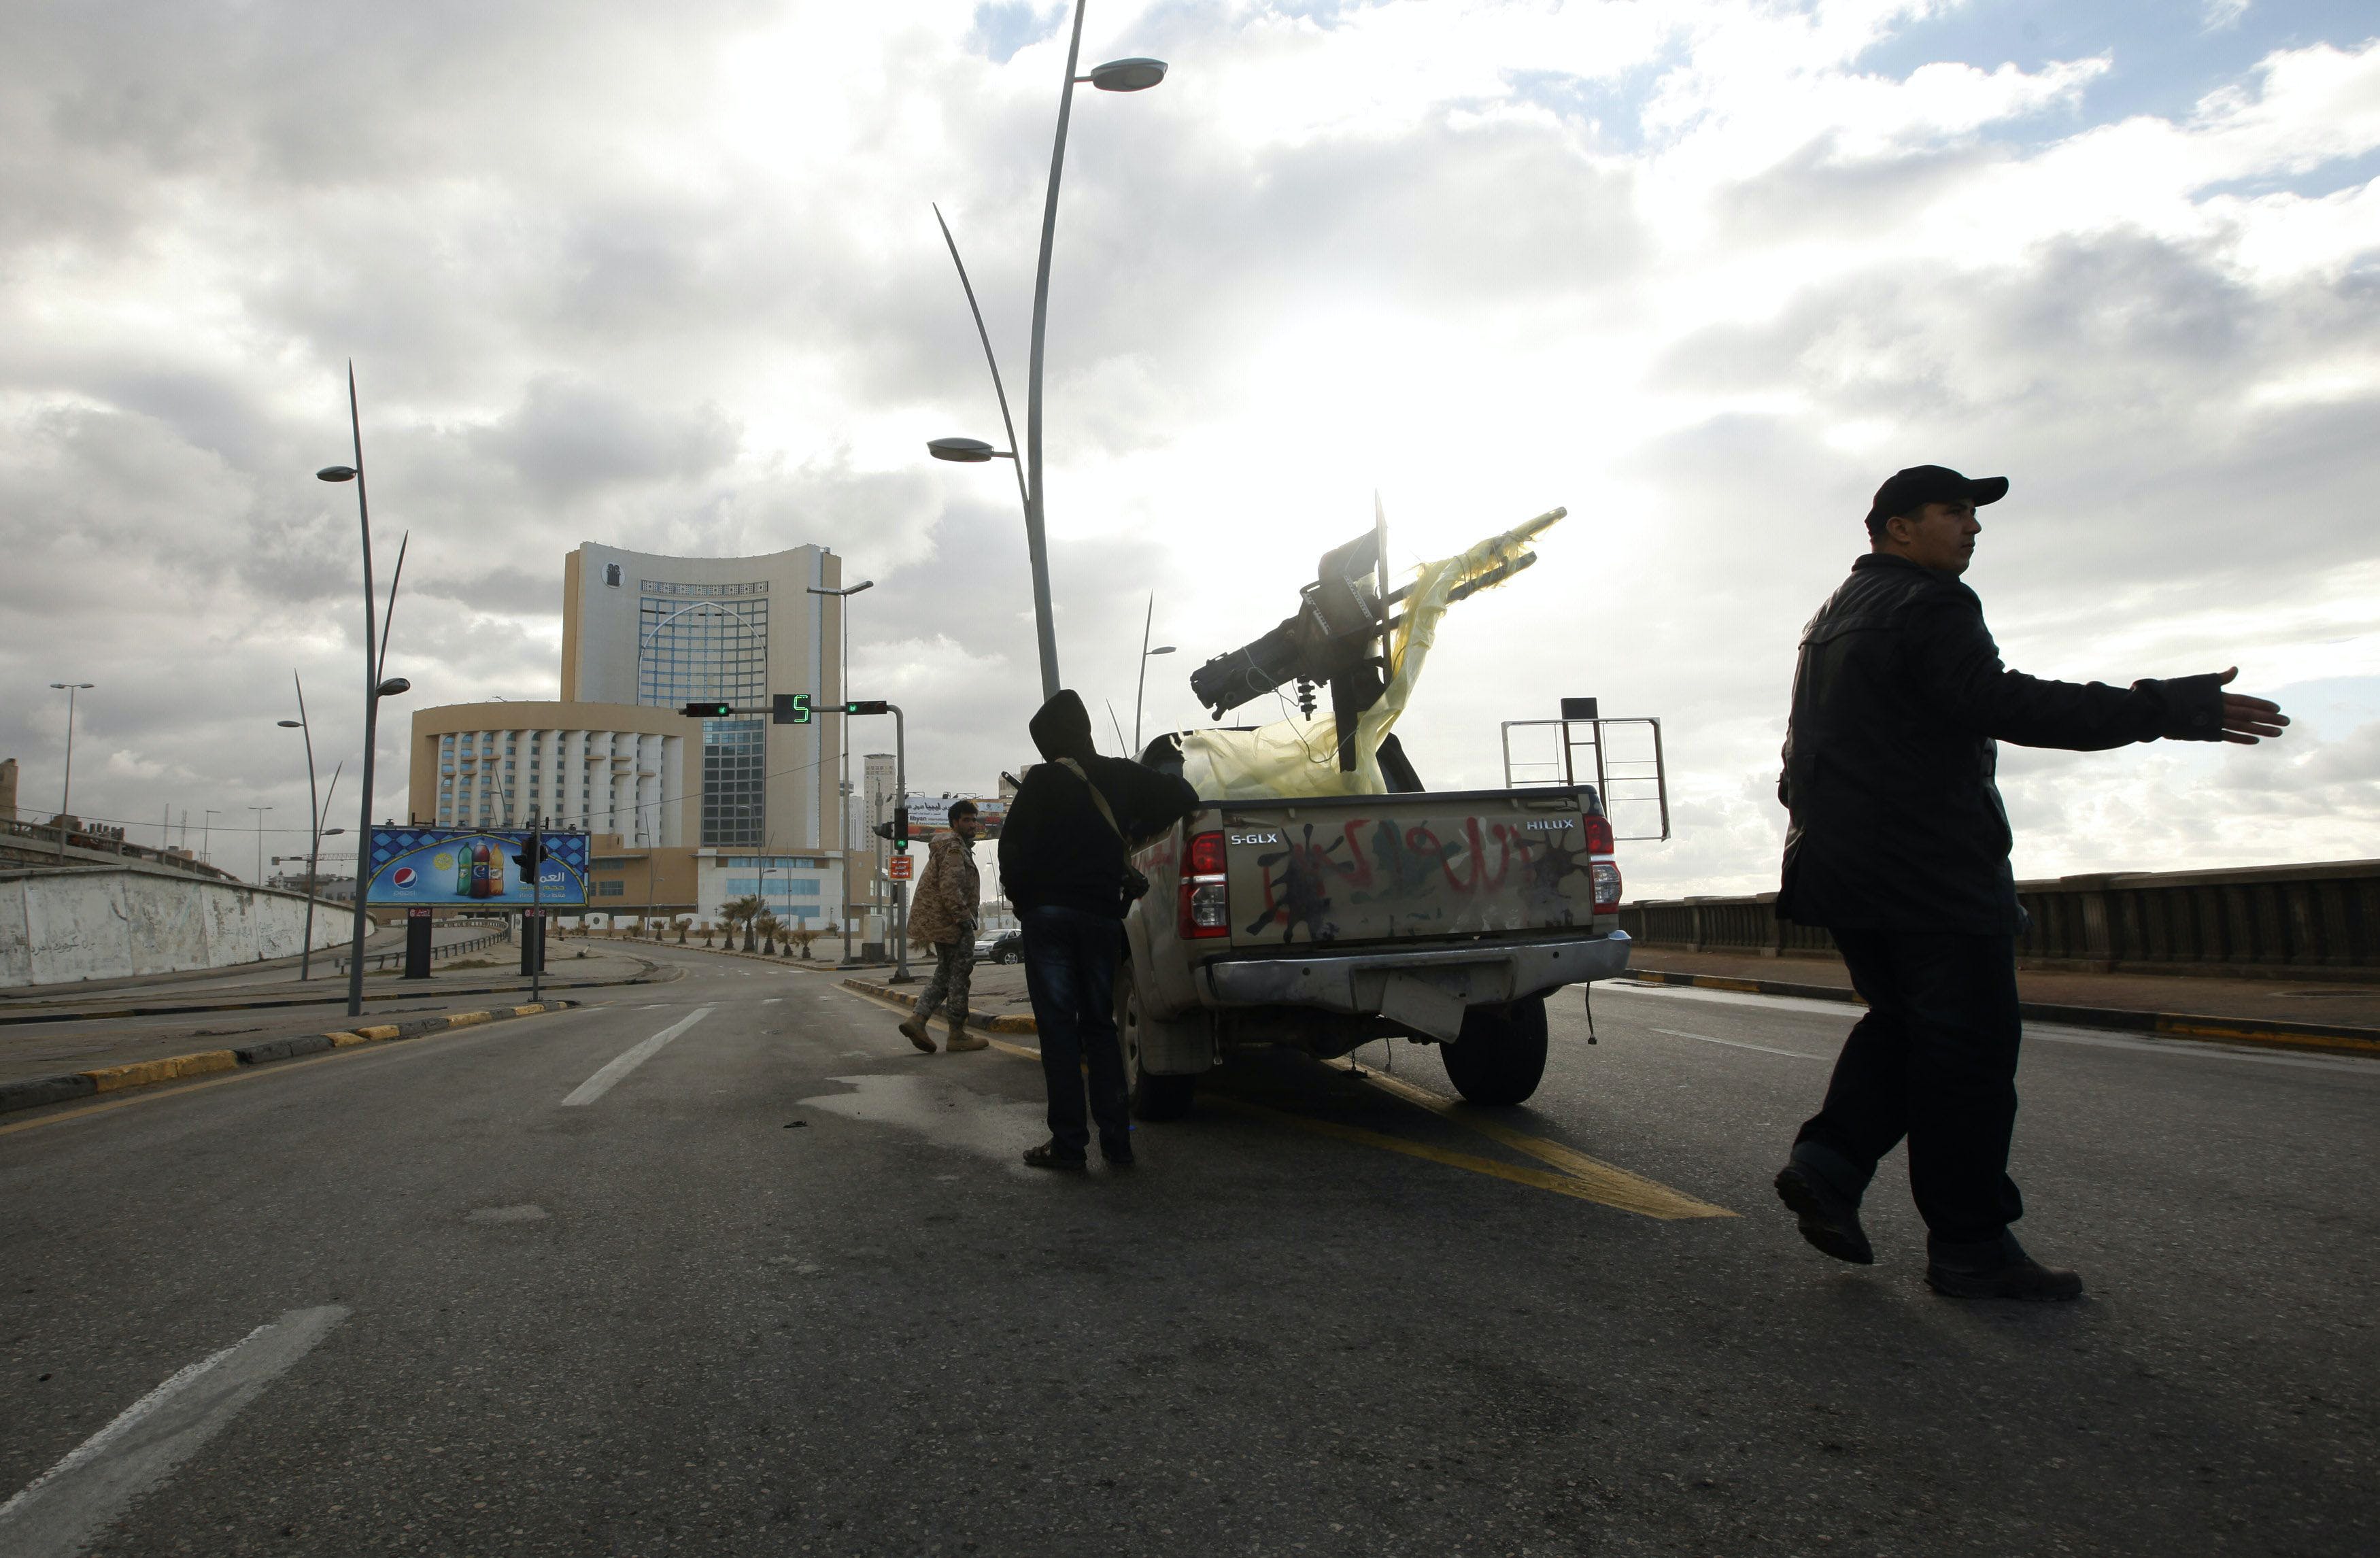 A vehicle belonging to security forces is pictured near Corinthia hotel in Tripoli